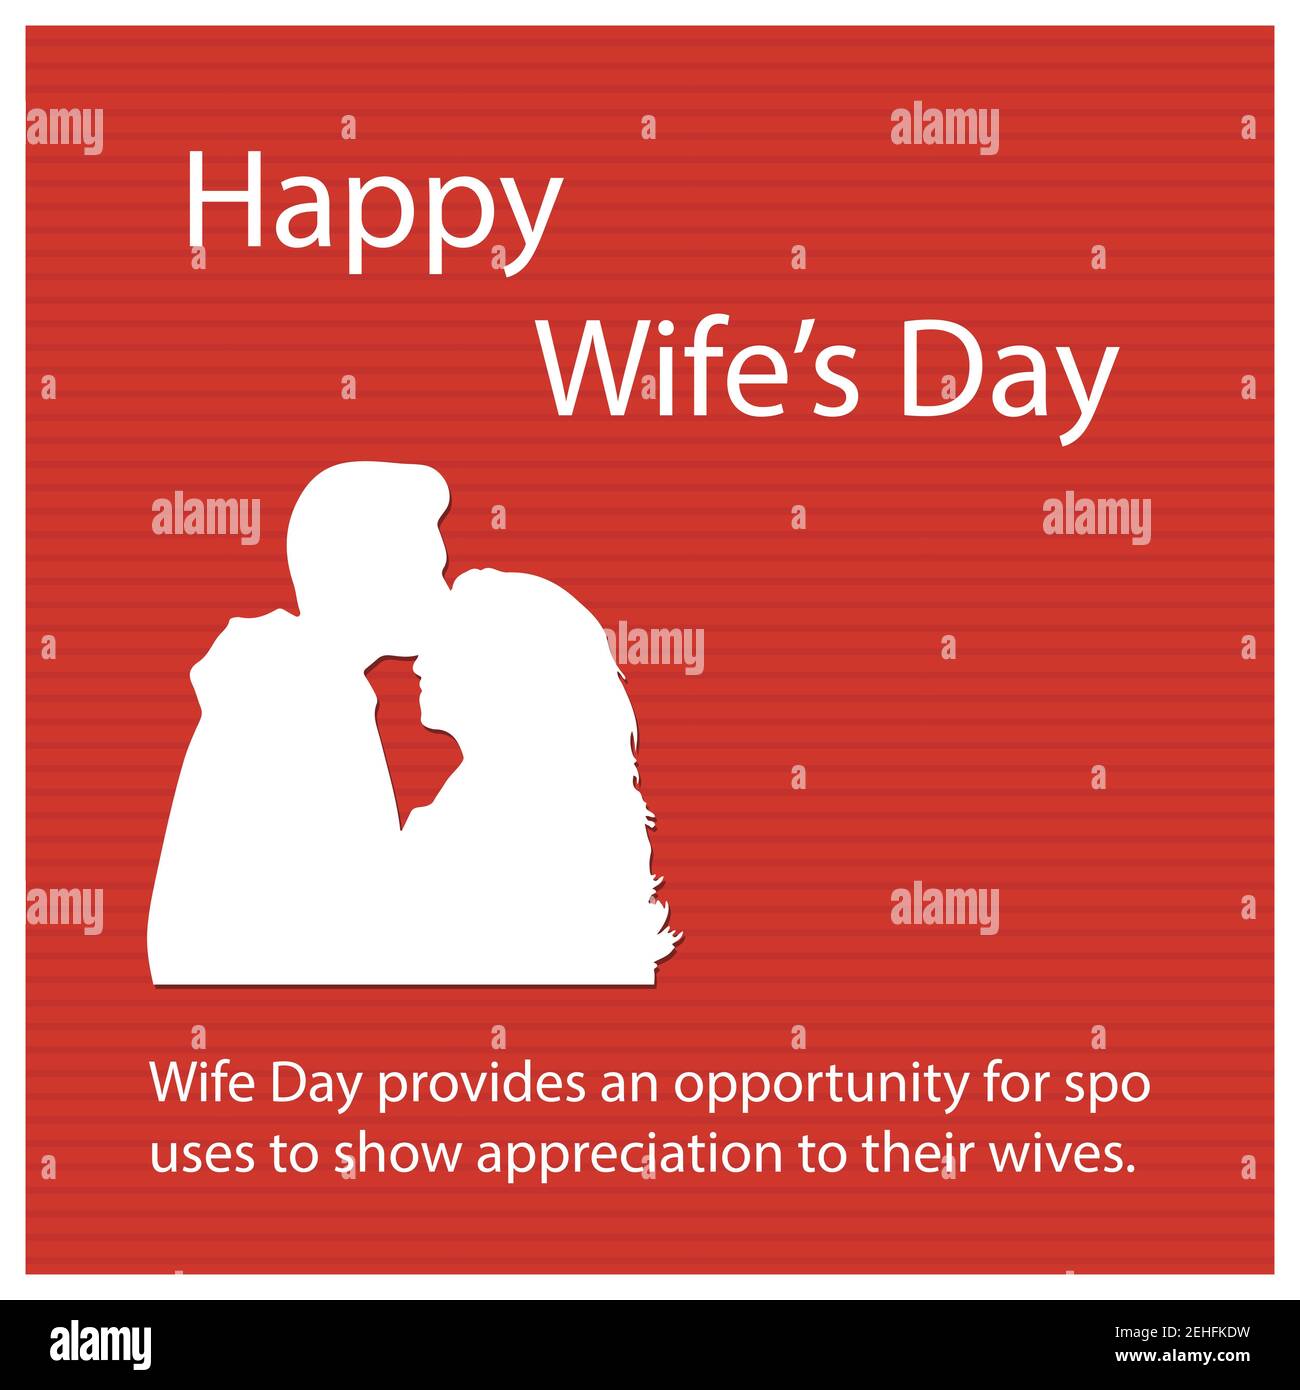 Wife Day provides an opportunity for spouses to show appreciation to